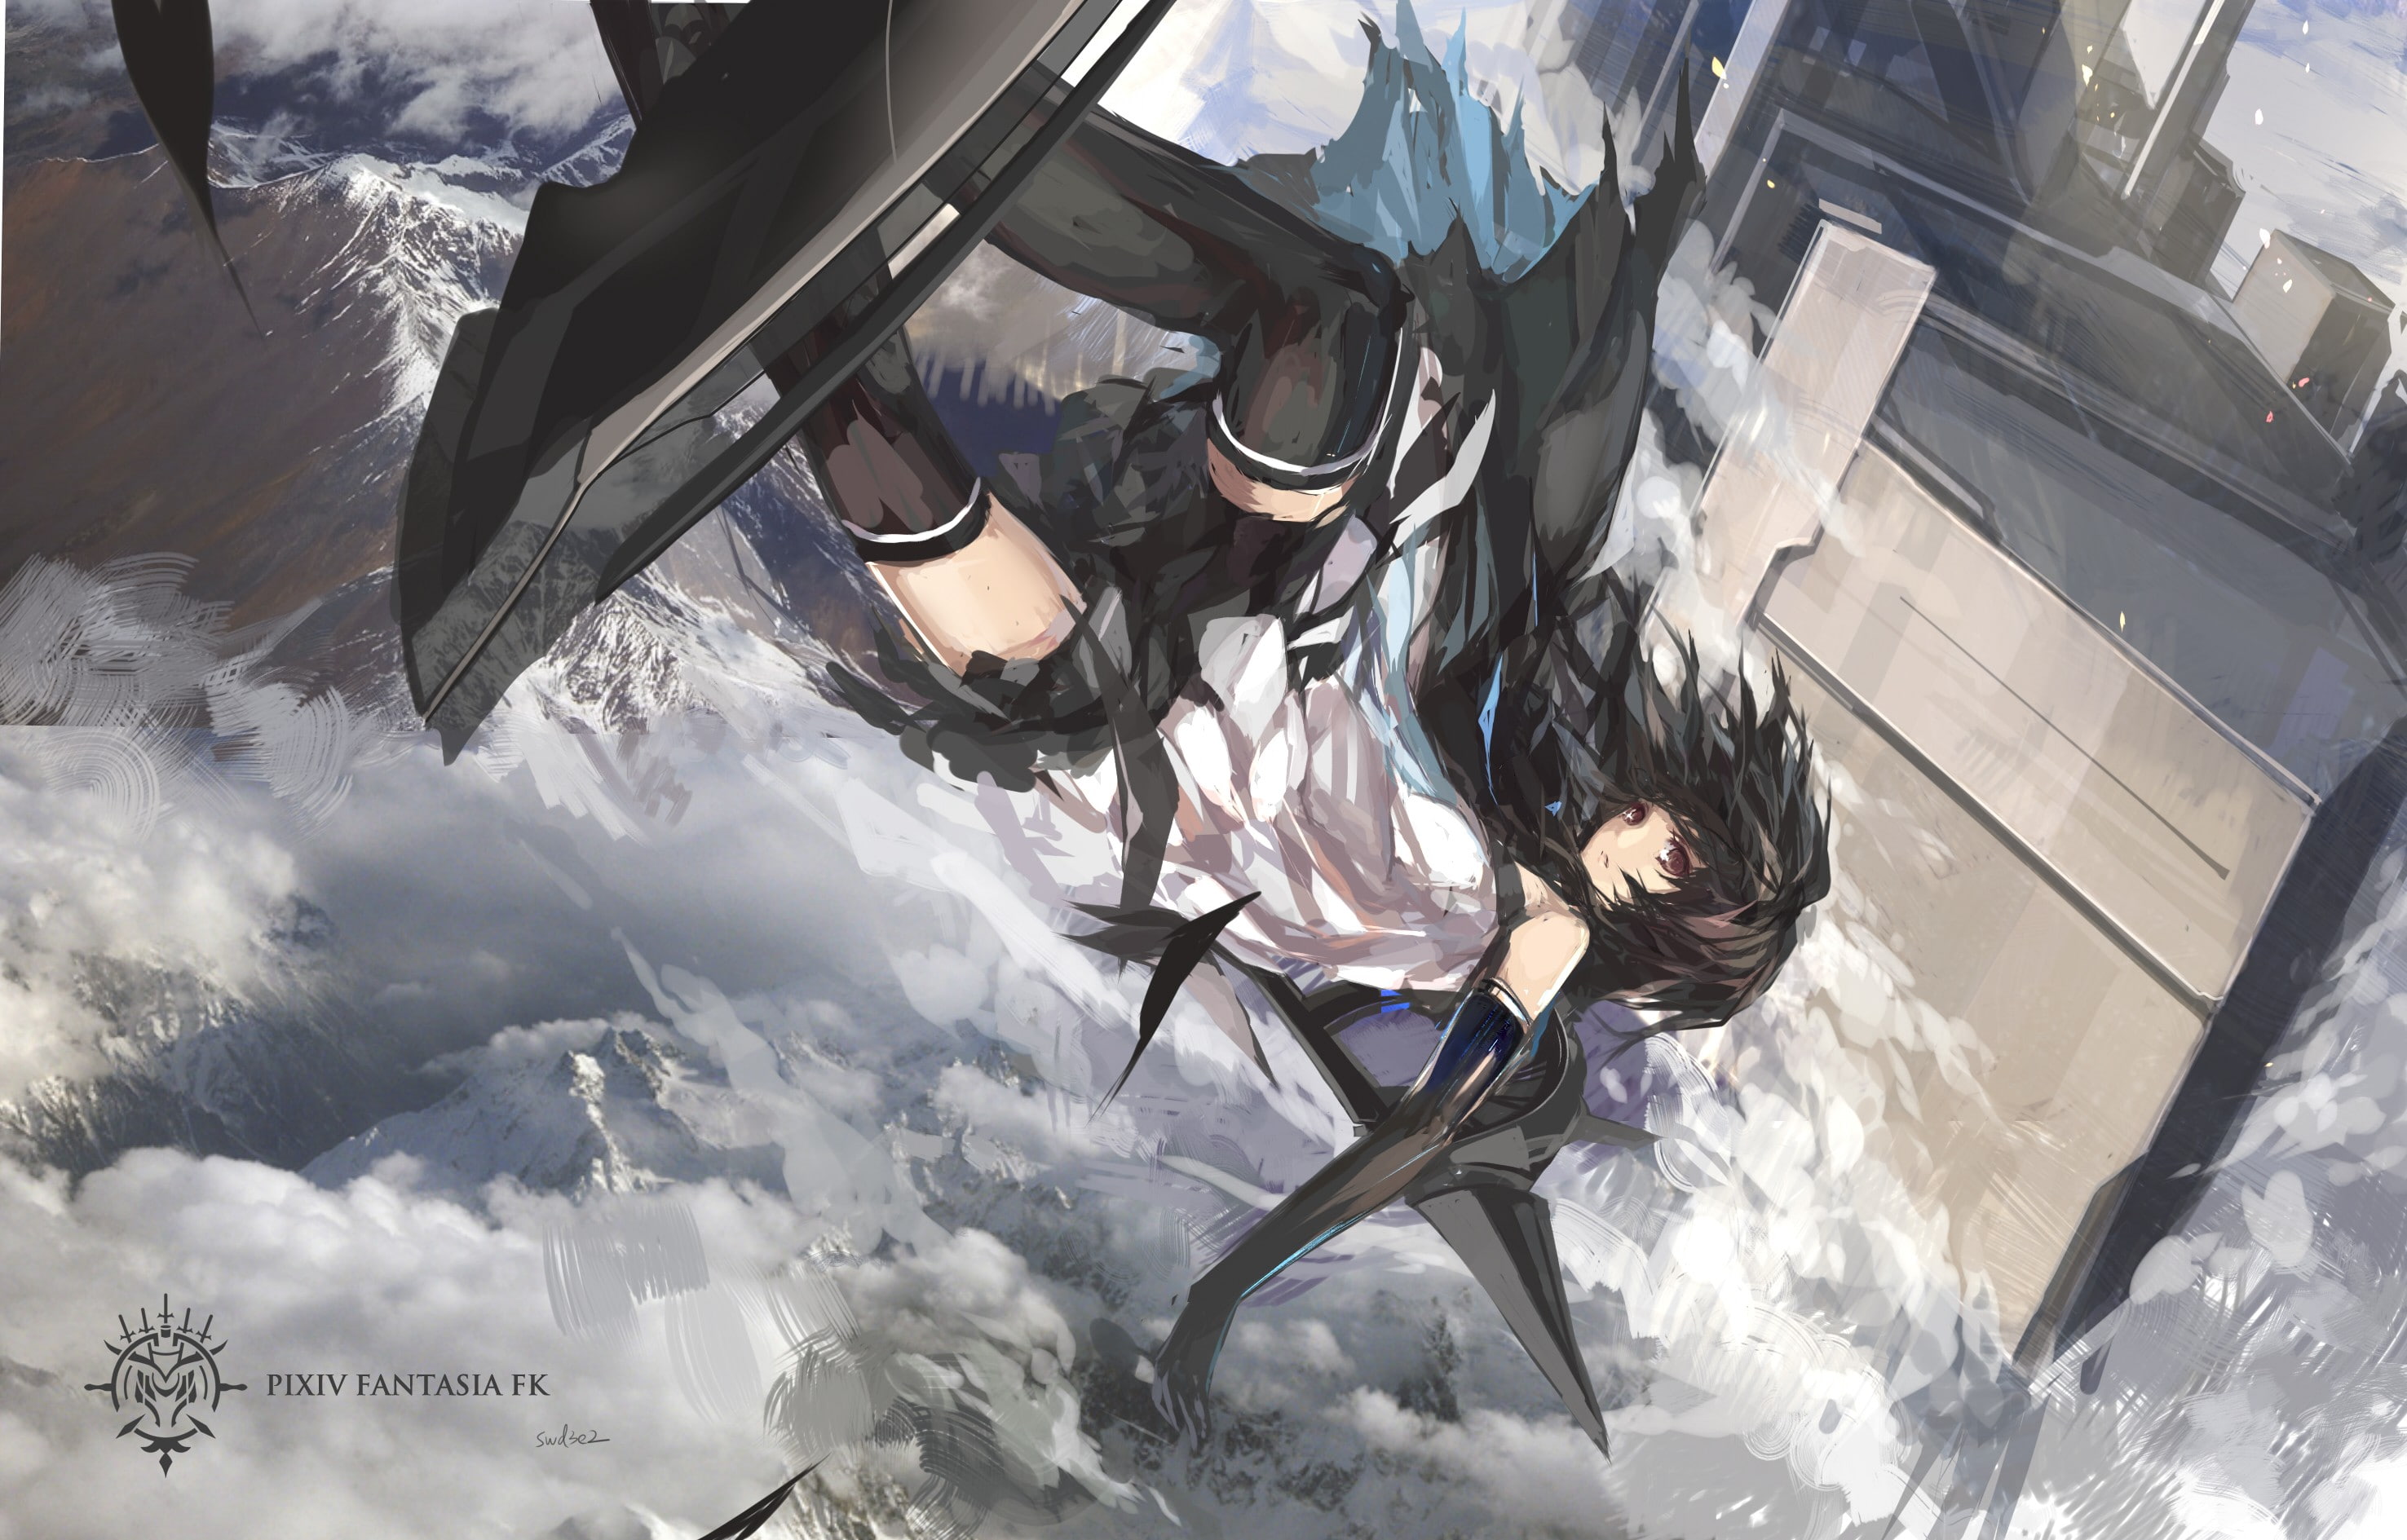 swd3e2, thigh-highs, original characters, clouds, anime, Pixiv Fantasia